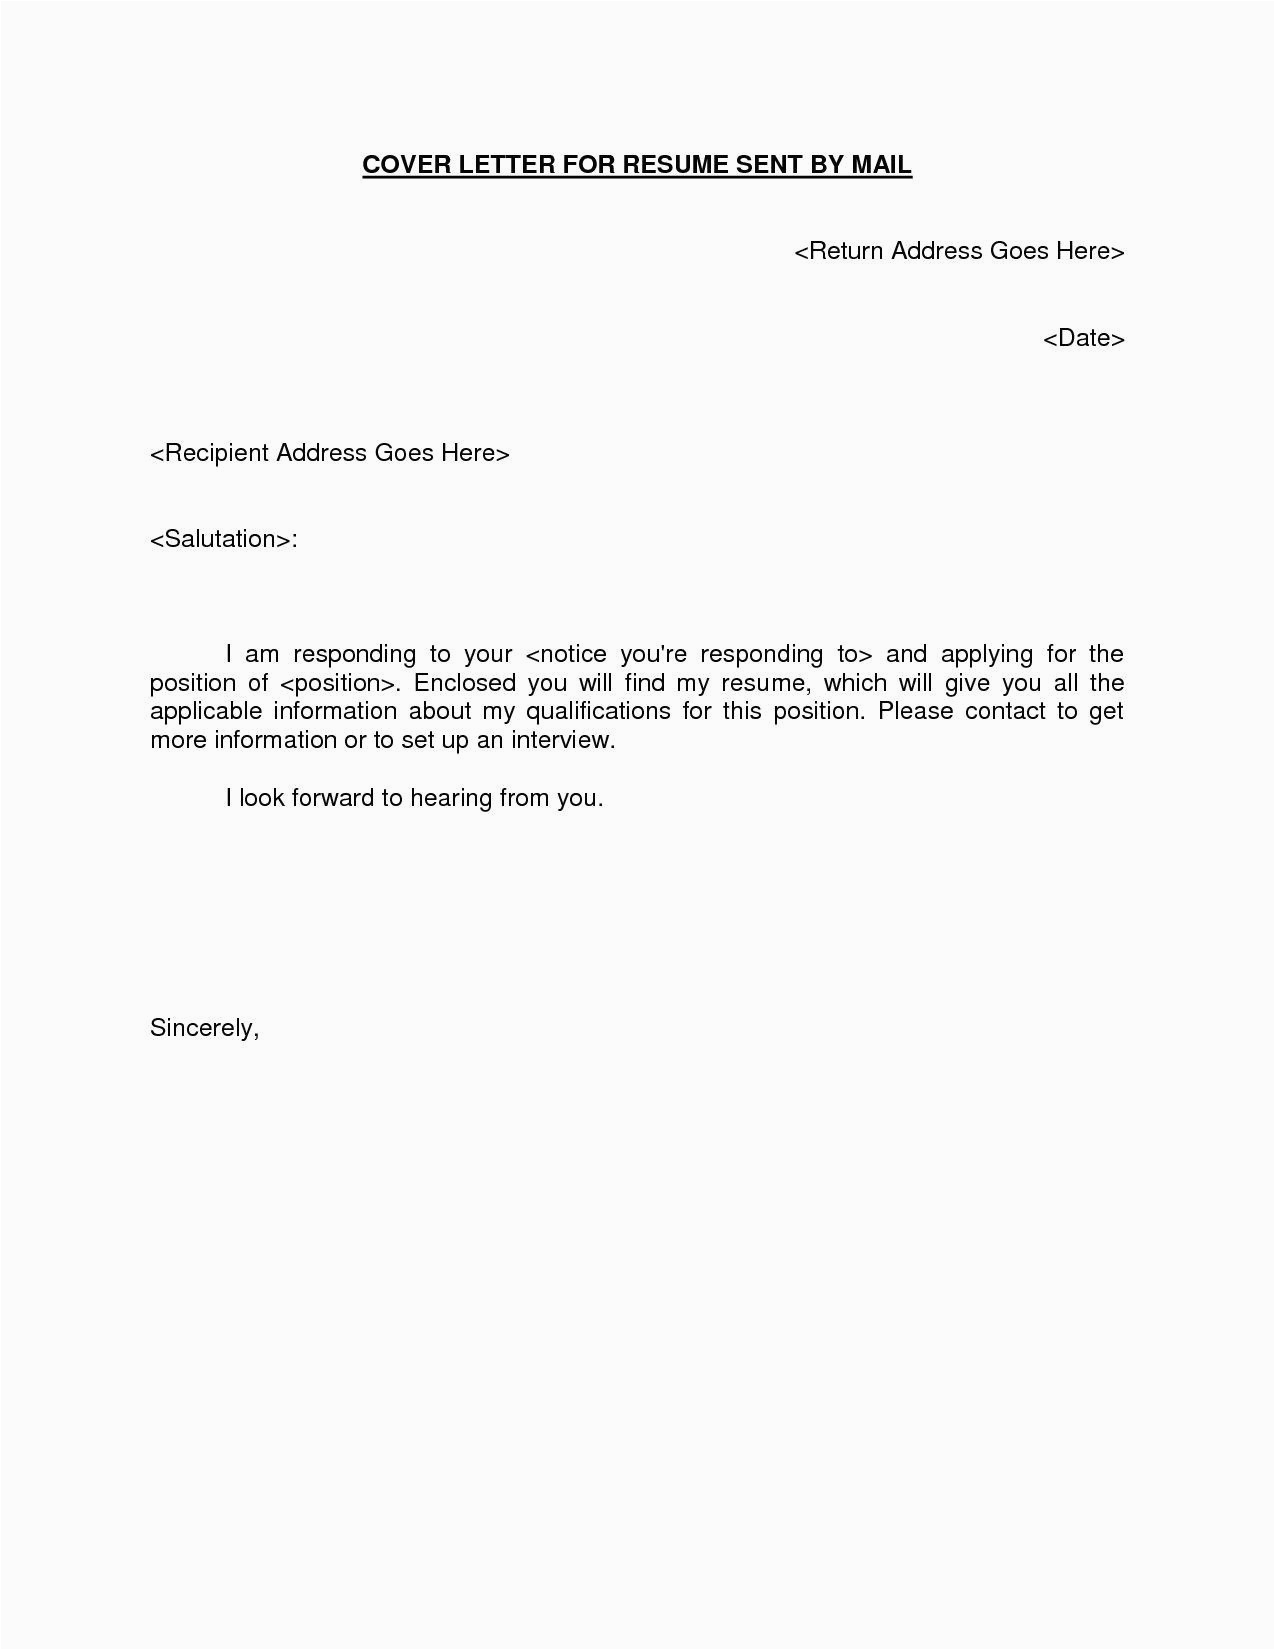 Sending Resume by Email Cover Letter Samples Unique Fax Cover Letters with Images